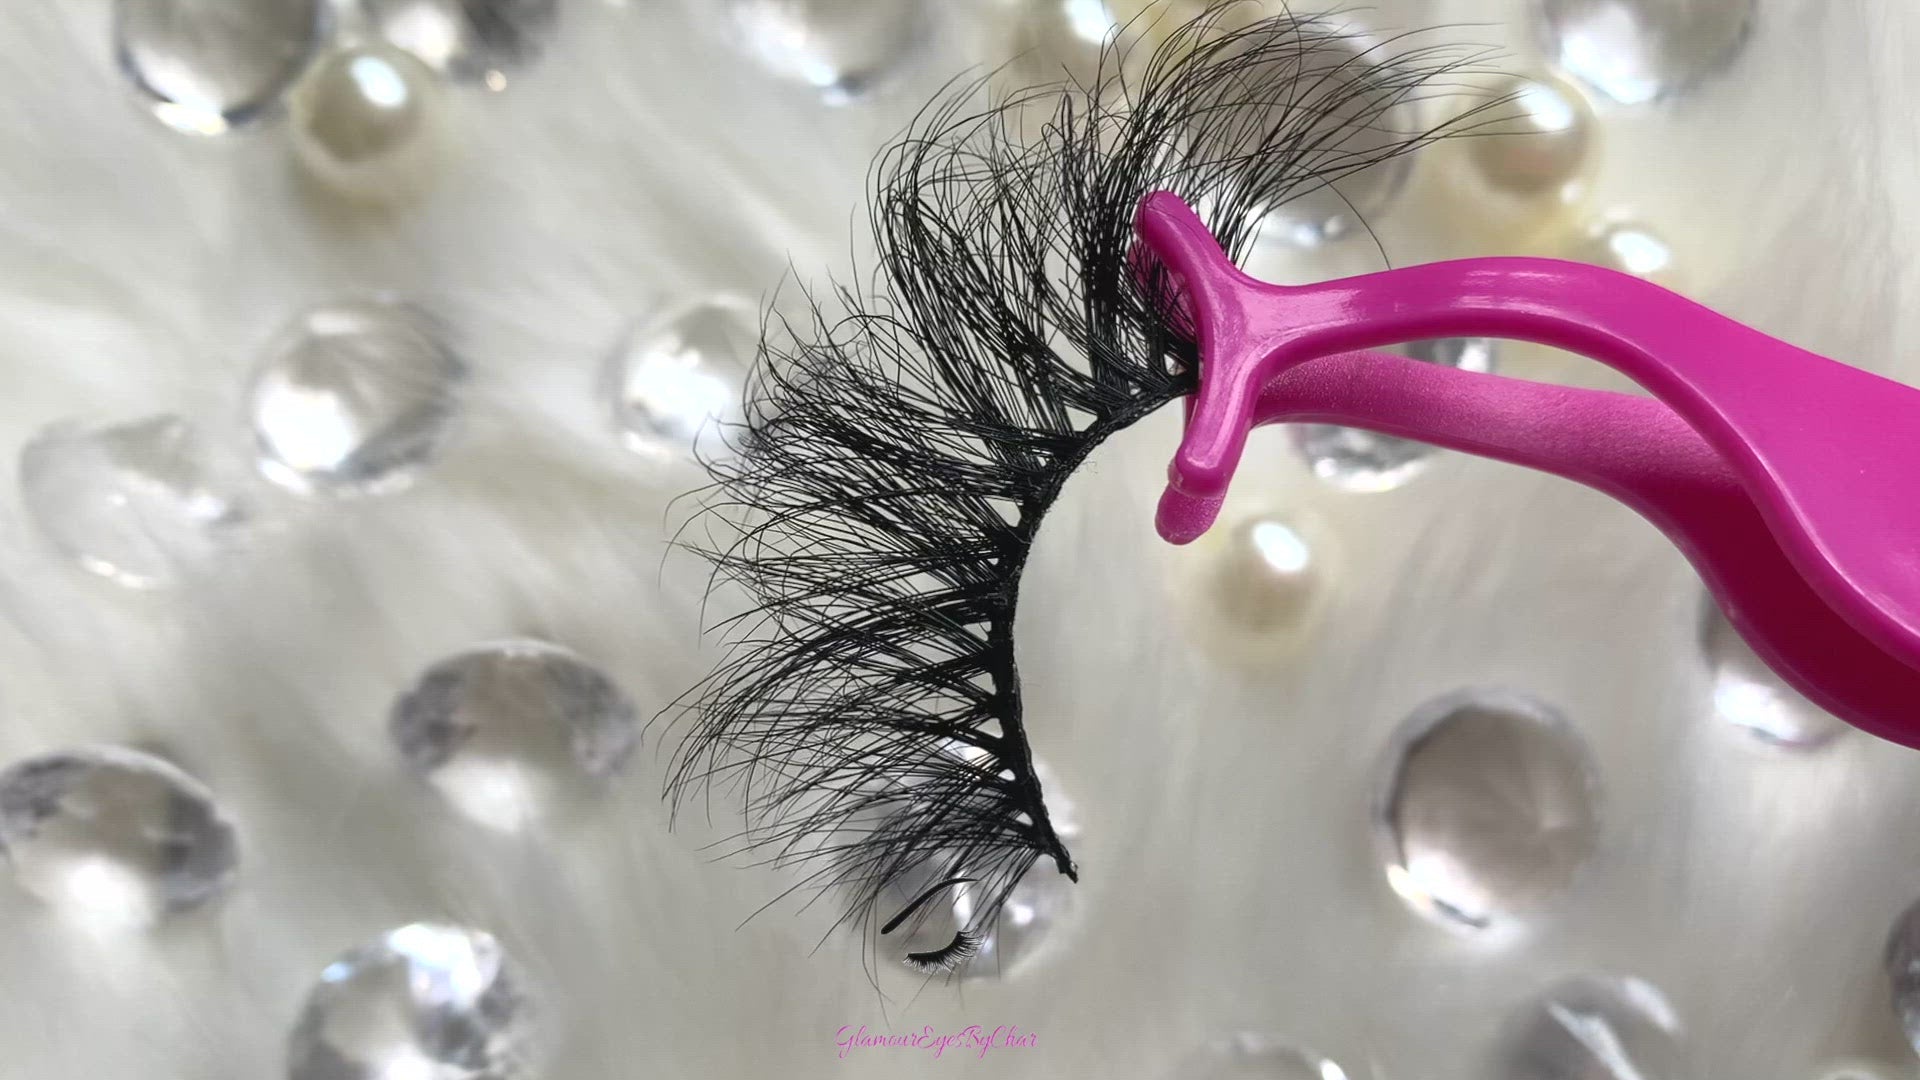 These 5D luxurious mink lashes are called Glamour and are 25mm in length. They are very dramatic, wispy, have a criss cross style flare effect, lightweight, and comfortable to wear on the lids. The thin lashband, makes the application process a breeze.